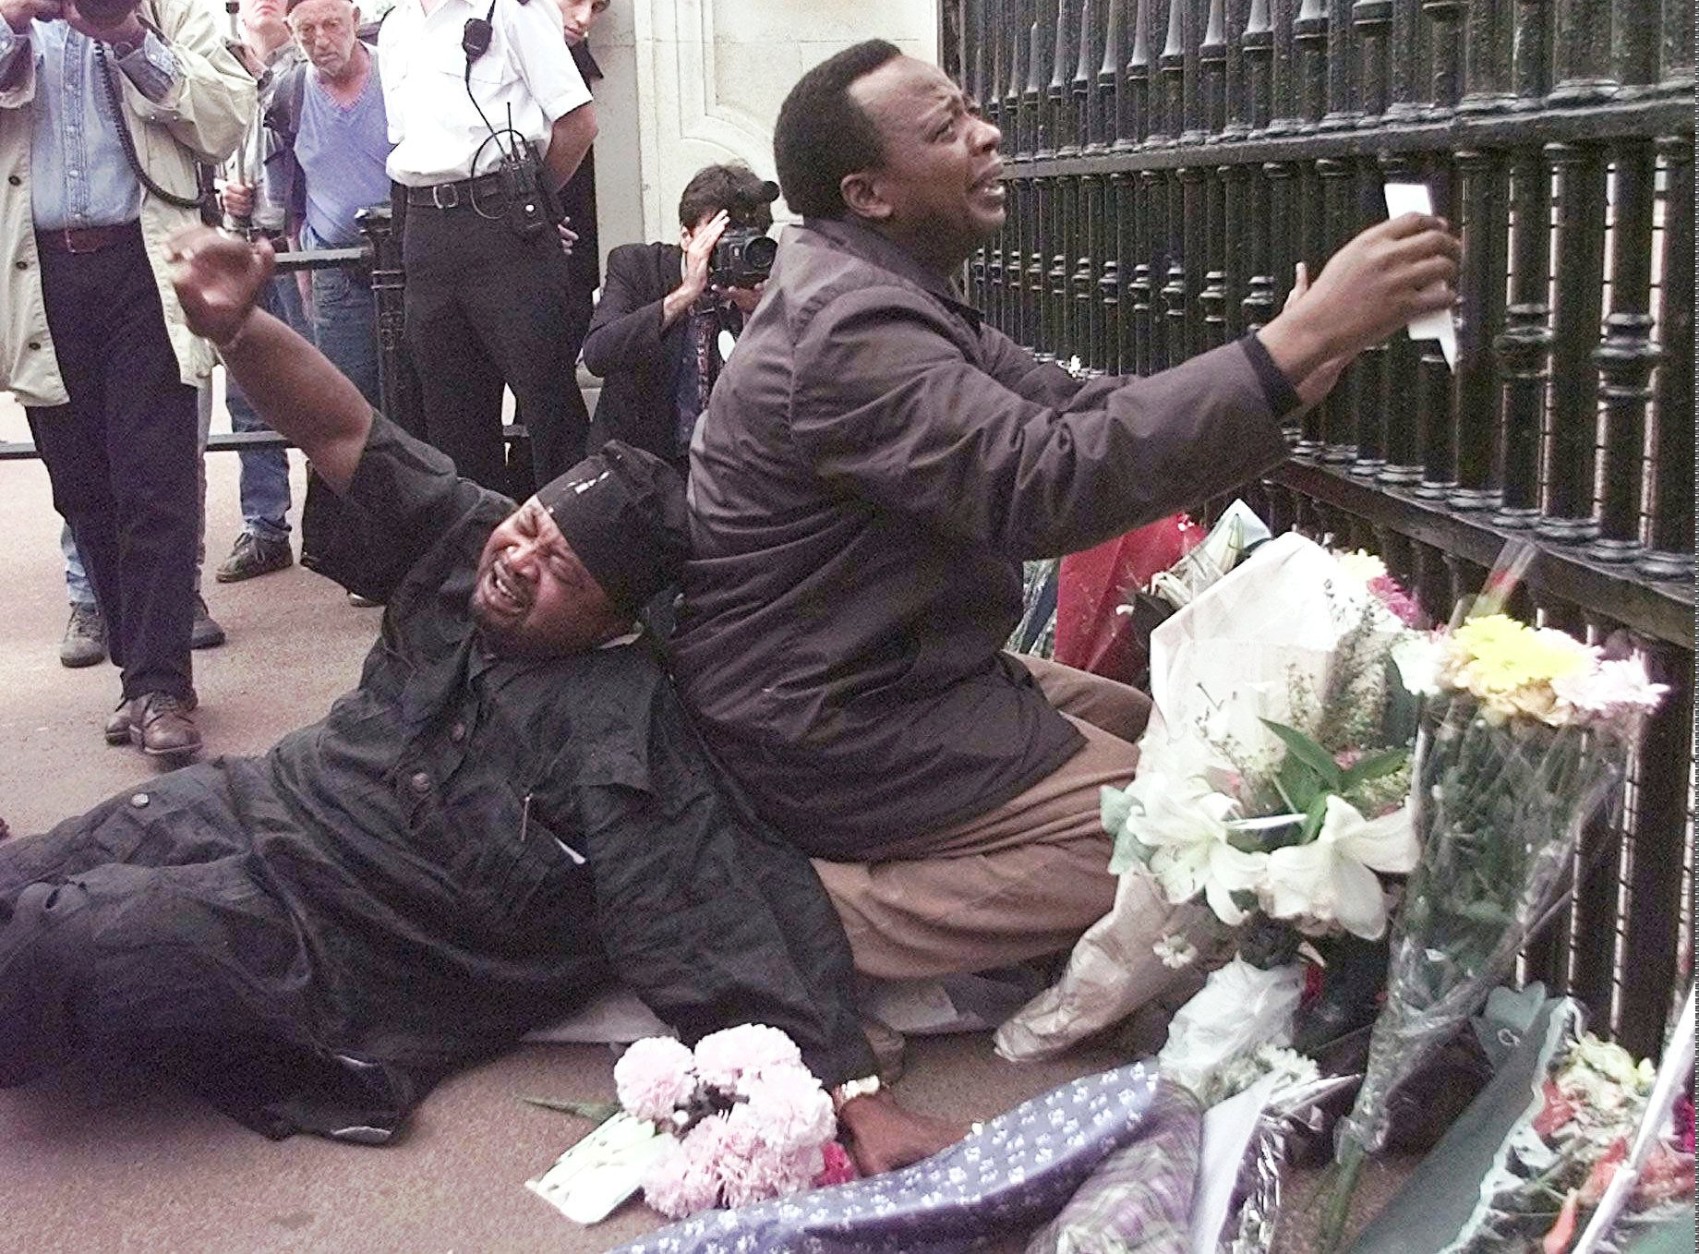 Two men grieve at the gate of Buckingham Palace in London  Sunday, August 31, 1997 after laying flowers for Diana, Princess of Wales, who was killed in a car crash with her comapnion Dodi Fayed in Paris early Sunday morning.  (AP Photo/Lynne Sladky)